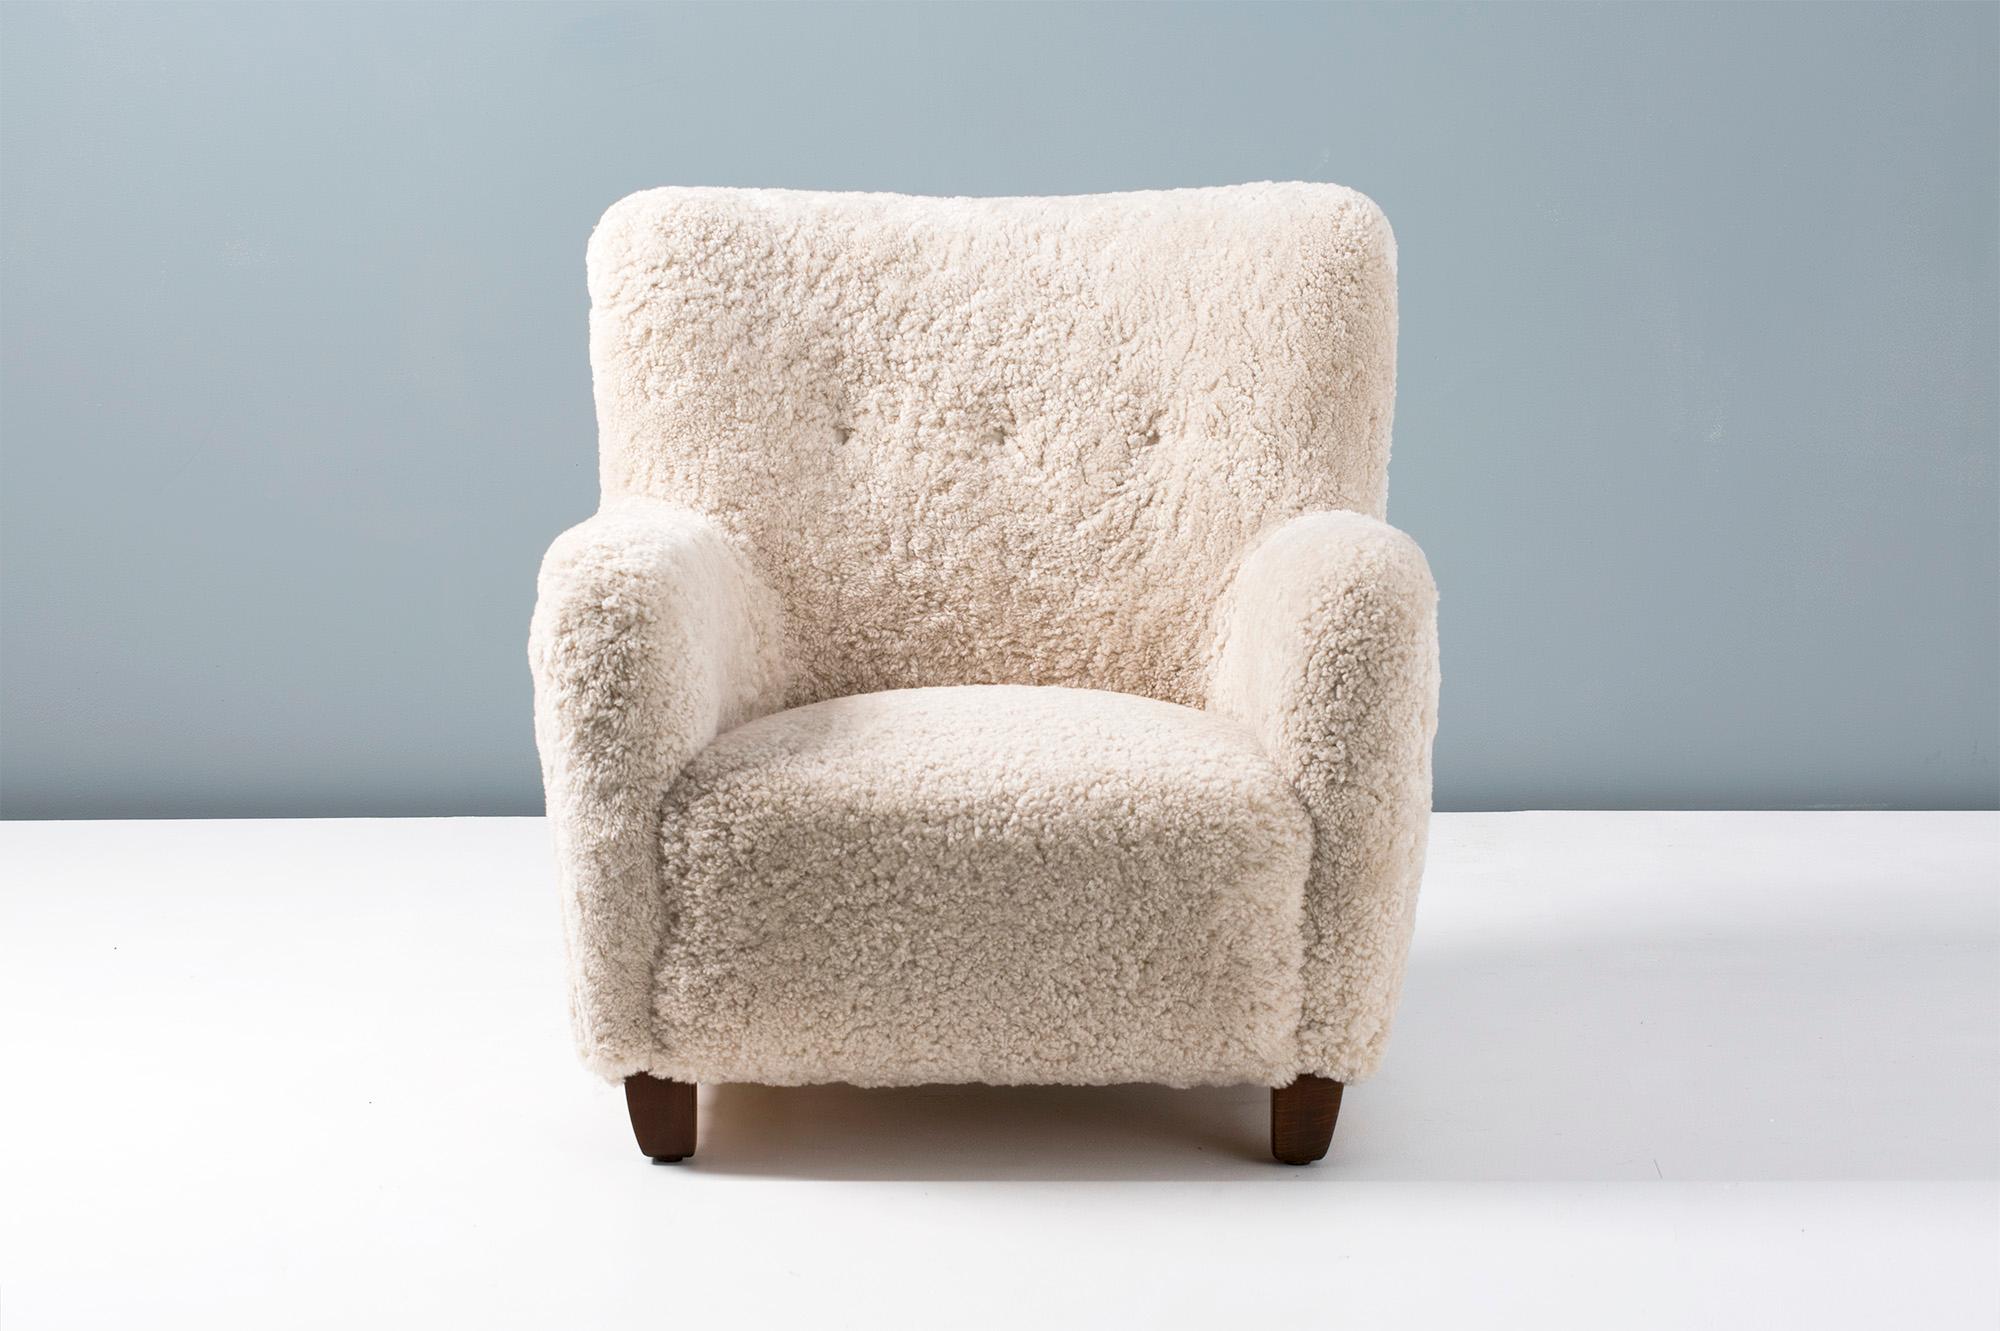 Sheepskin Armchair originally designed by Danish architect Jens Houmoller Klemmensen in 1939. 

This high-end reproduction is handmade to order at our workshops in England under license from the Klemmensen estate. The chair legs are available in